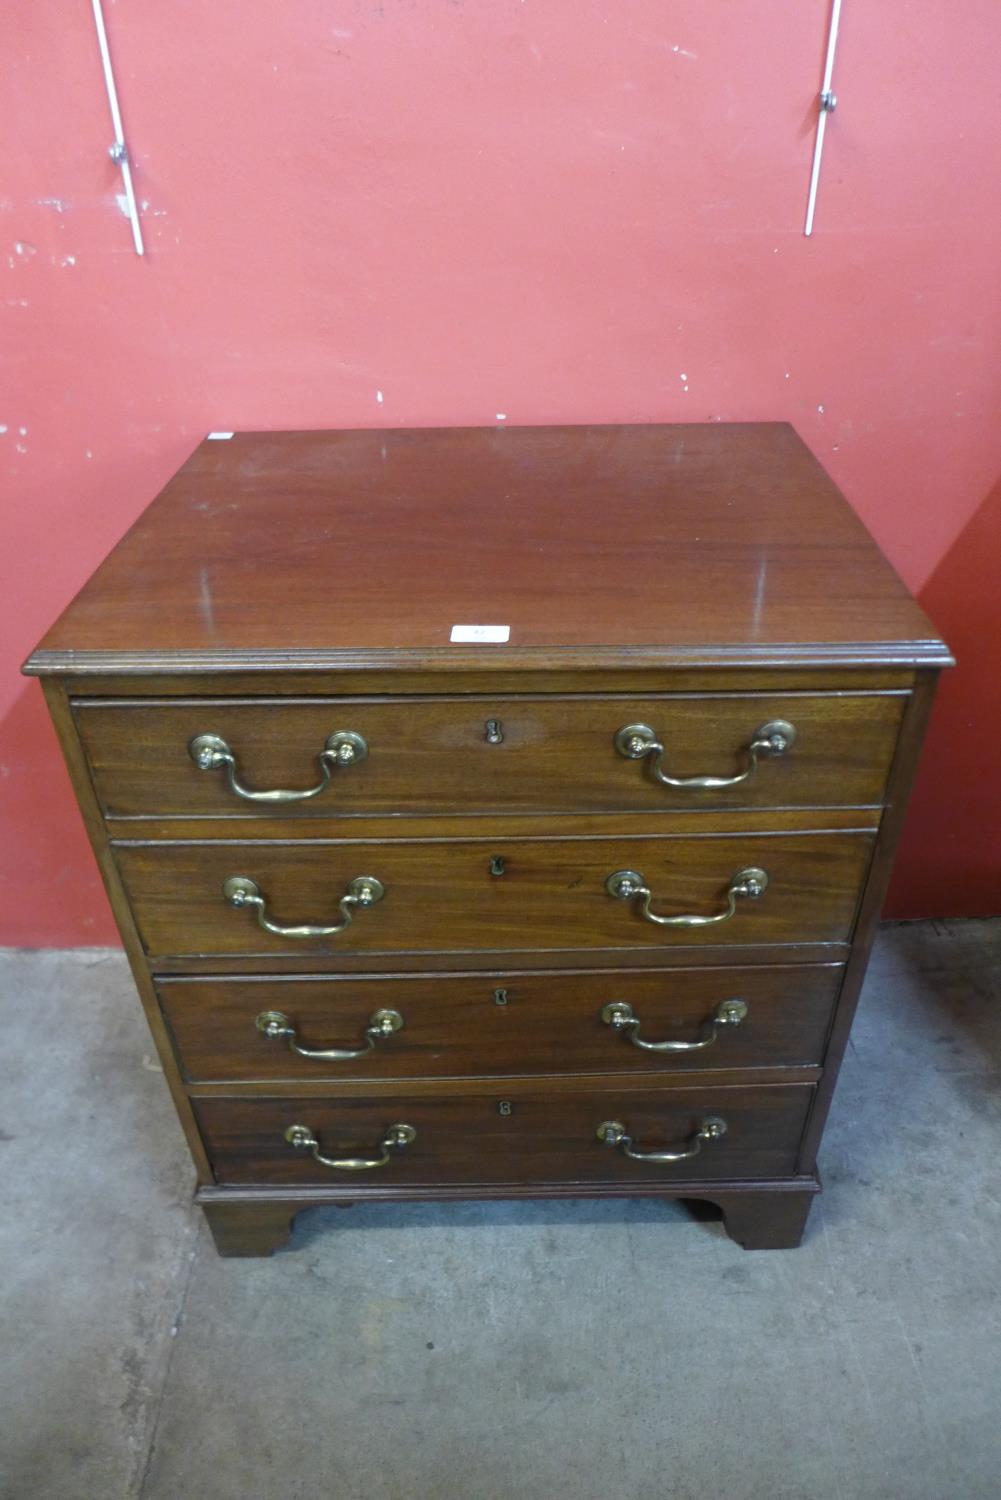 A George III style mahogany bachelors chest of drawers